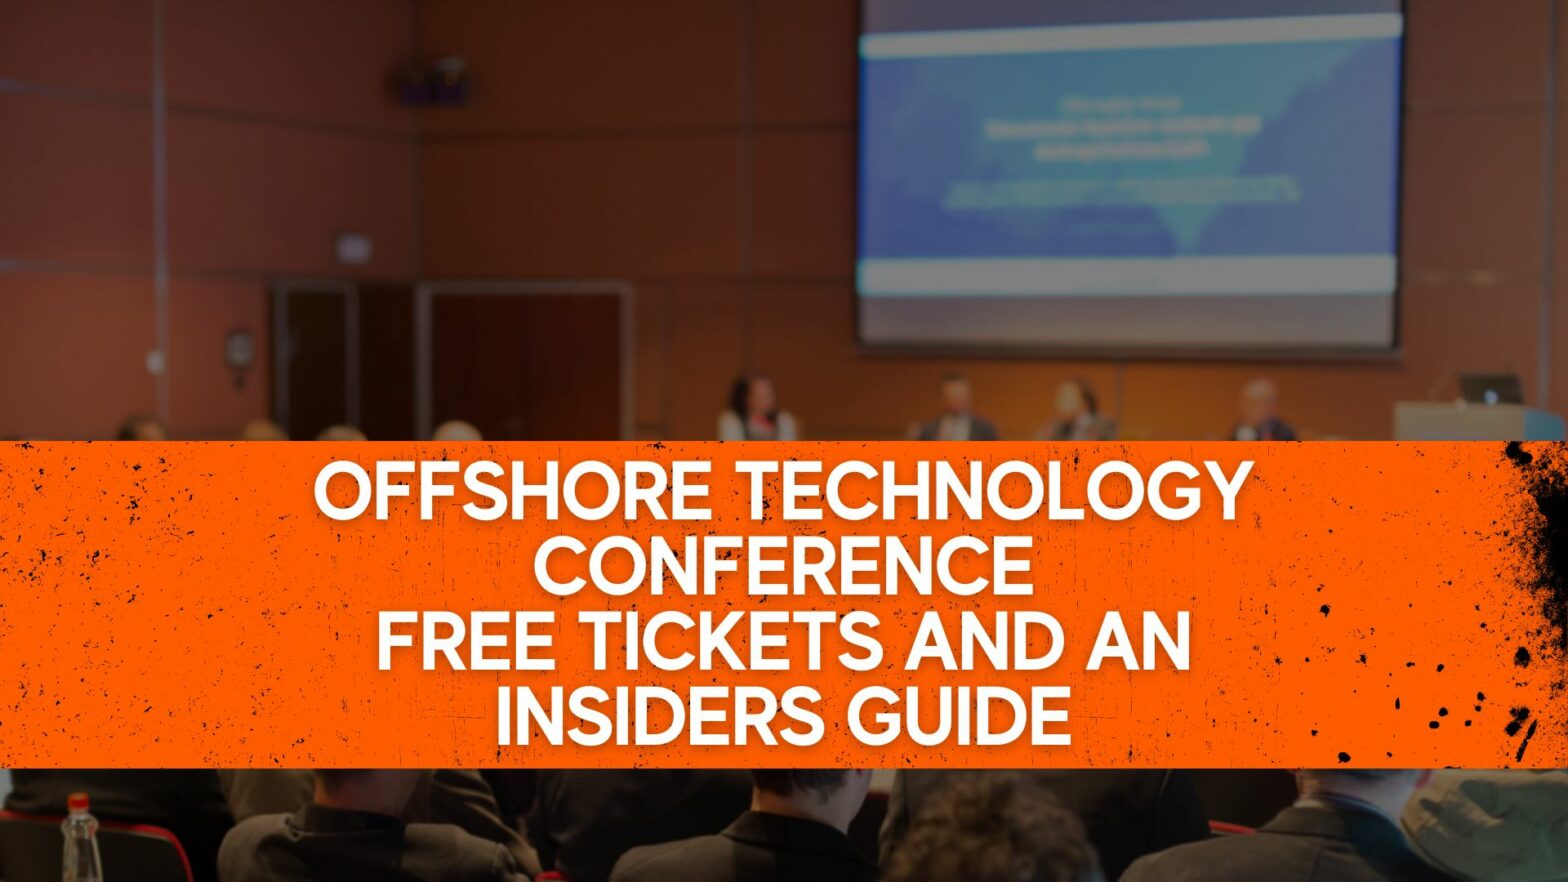 Offshore Technology Conference - Free Tickets and An Insiders Guide